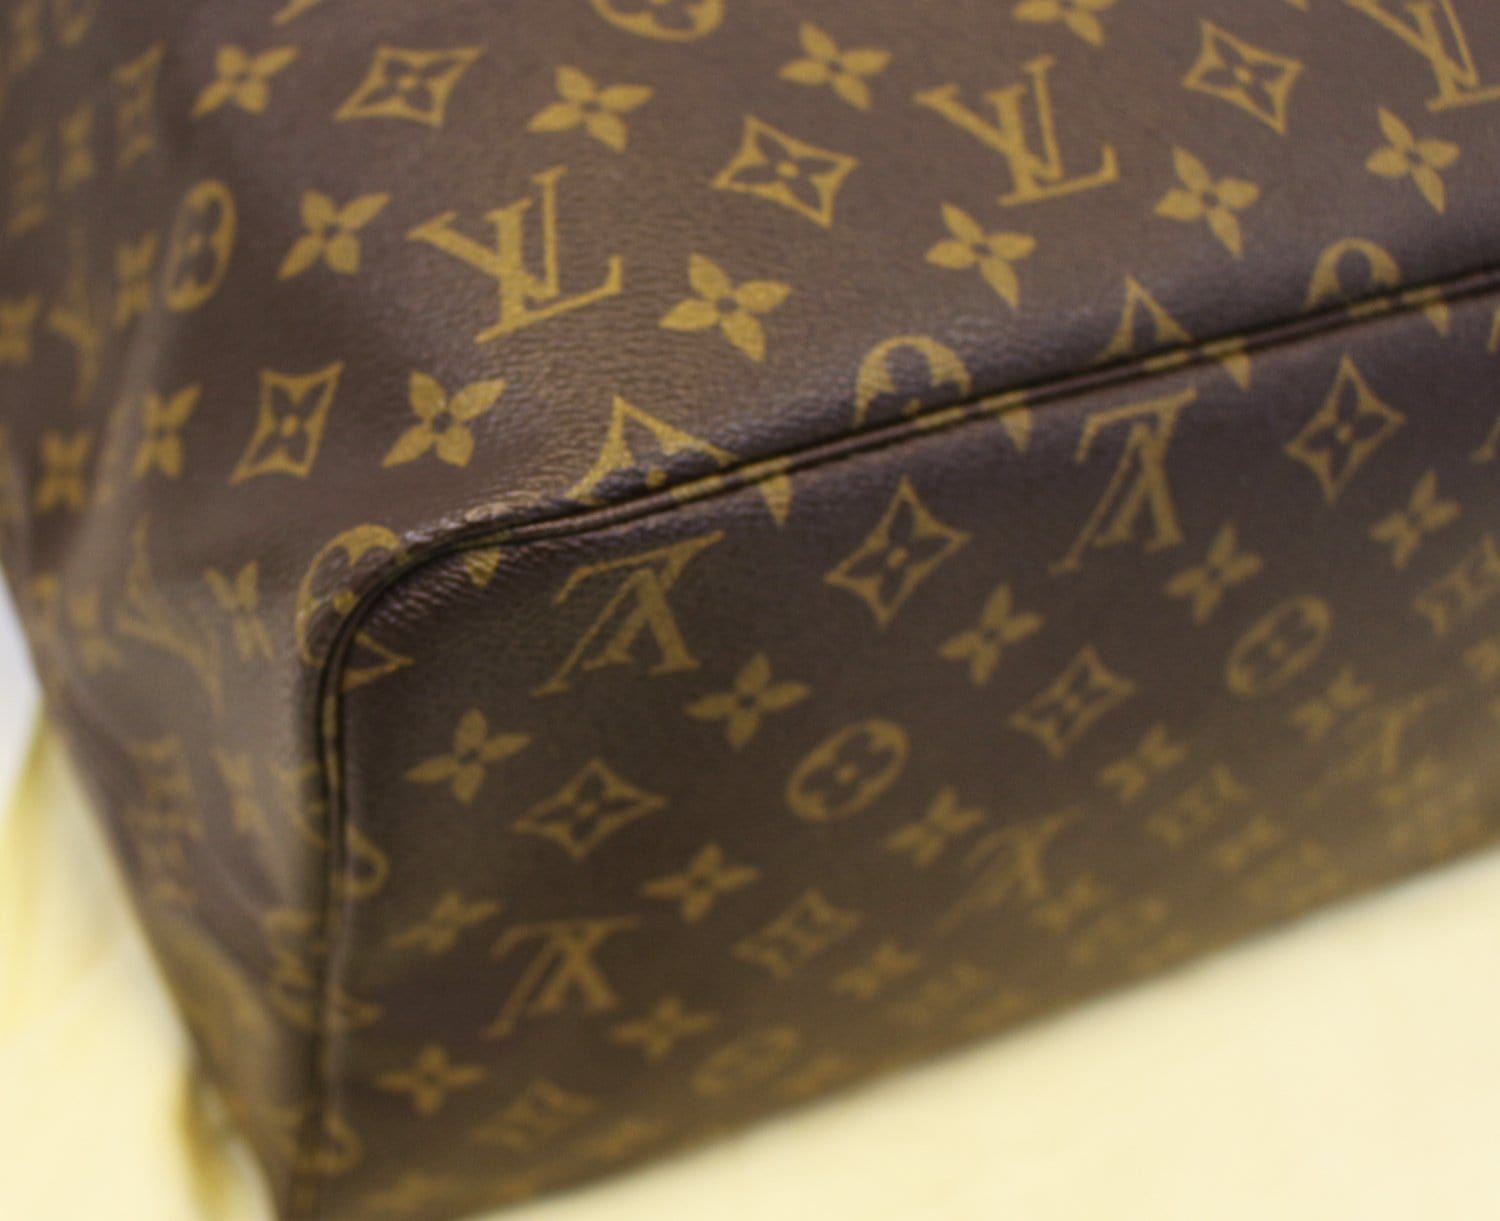 Louis Vuitton Monogram Neverfull GM Pouch Only with Red Interior